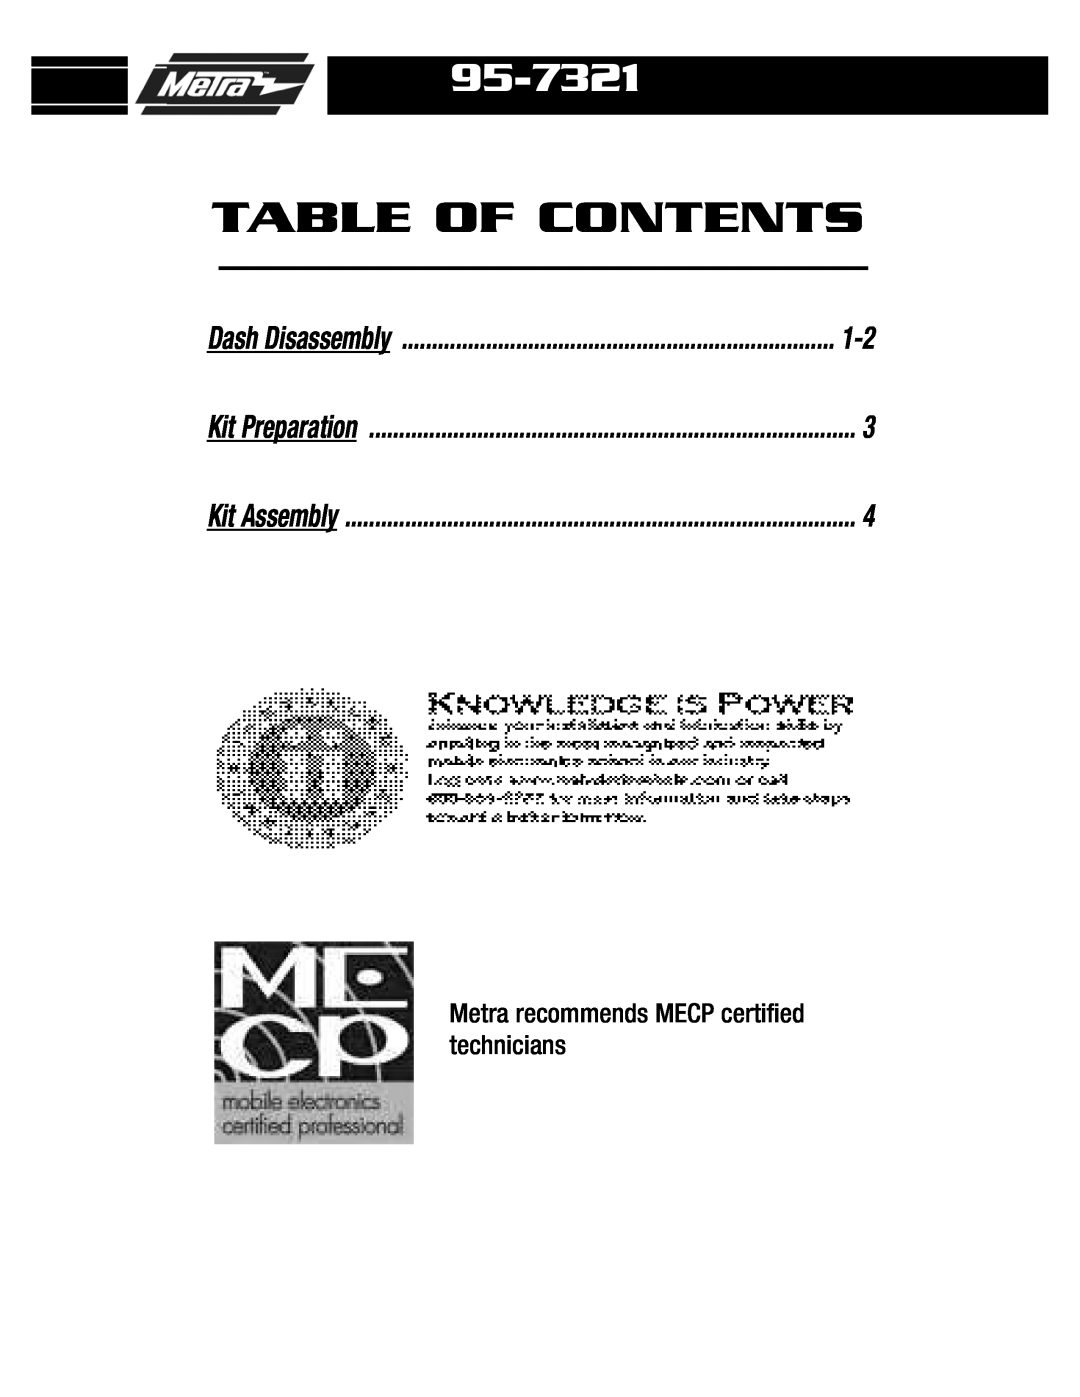 Metra Electronics 95-7321 Table Of Contents, Metra recommends MECP certified technicians, Dash Disassembly, Kit Assembly 